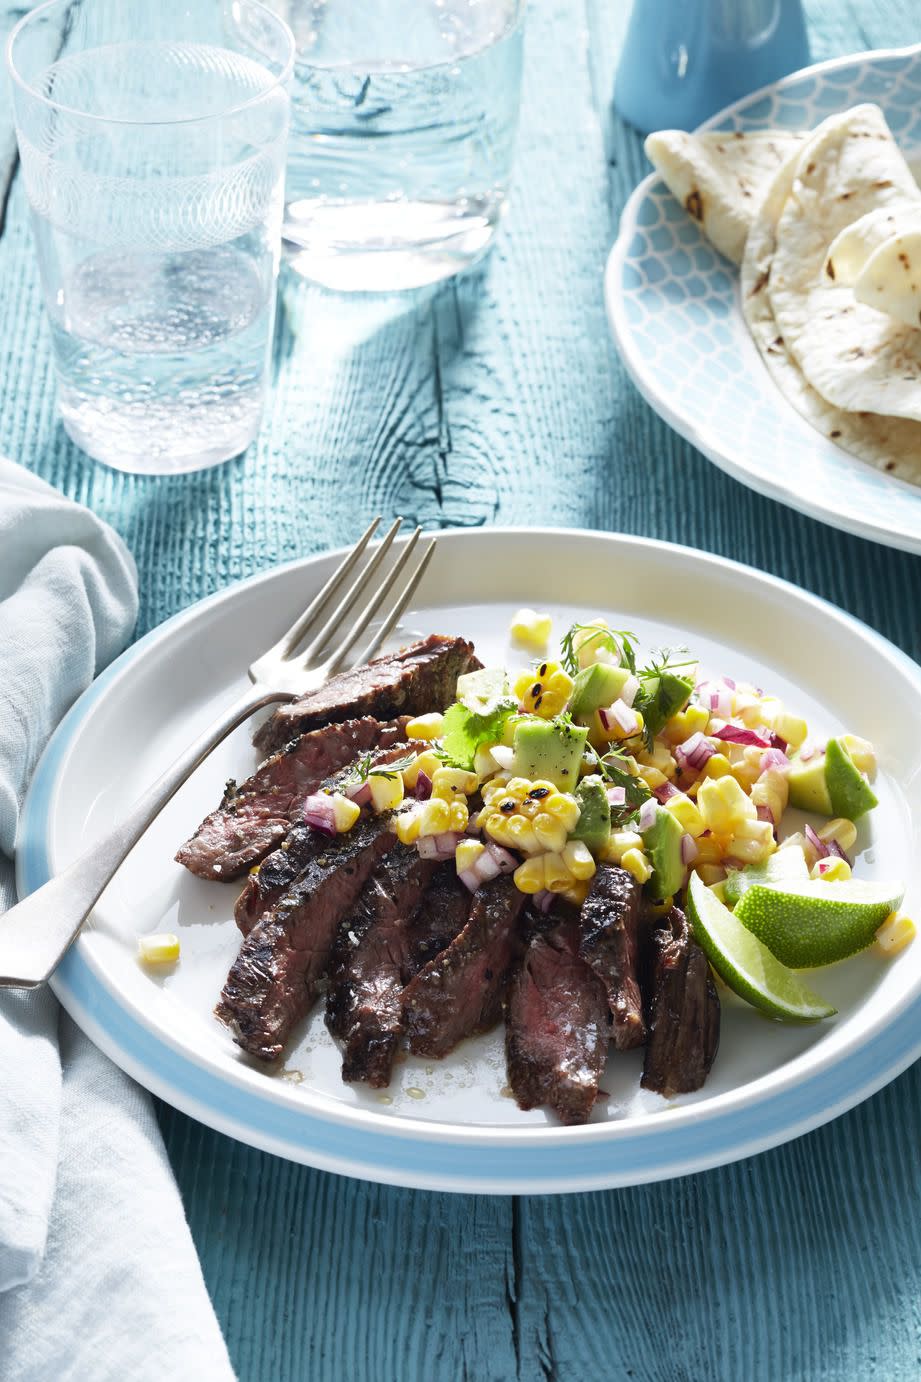 Grilled Skirt Steak with Charred Corn and Avocado Salad